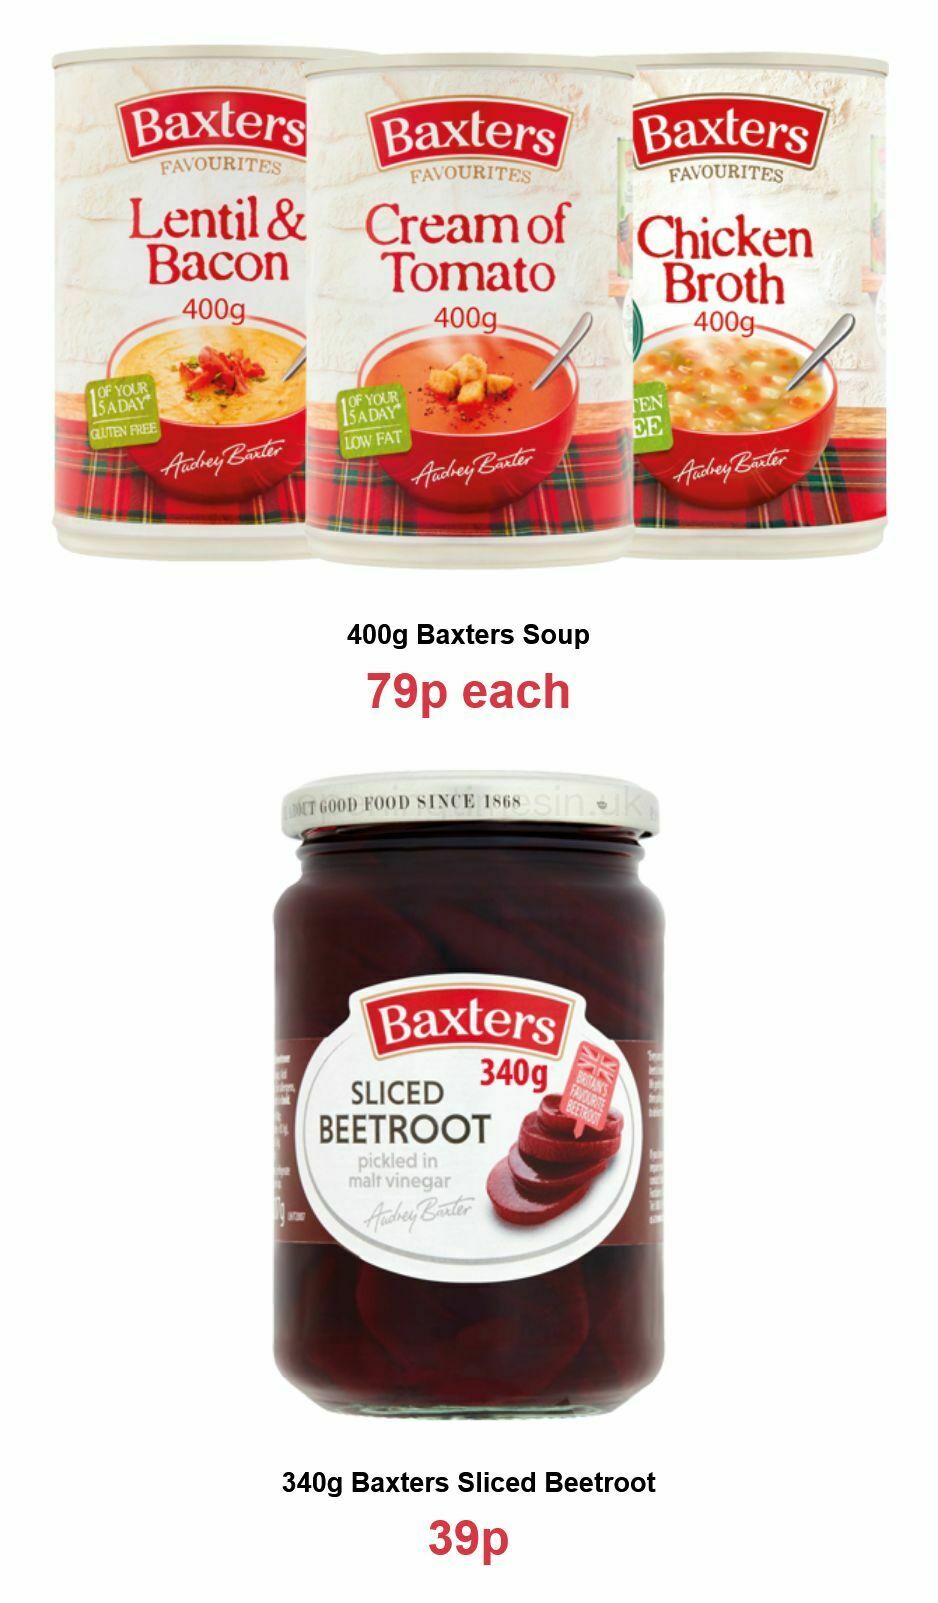 Farmfoods Offers from 2 May